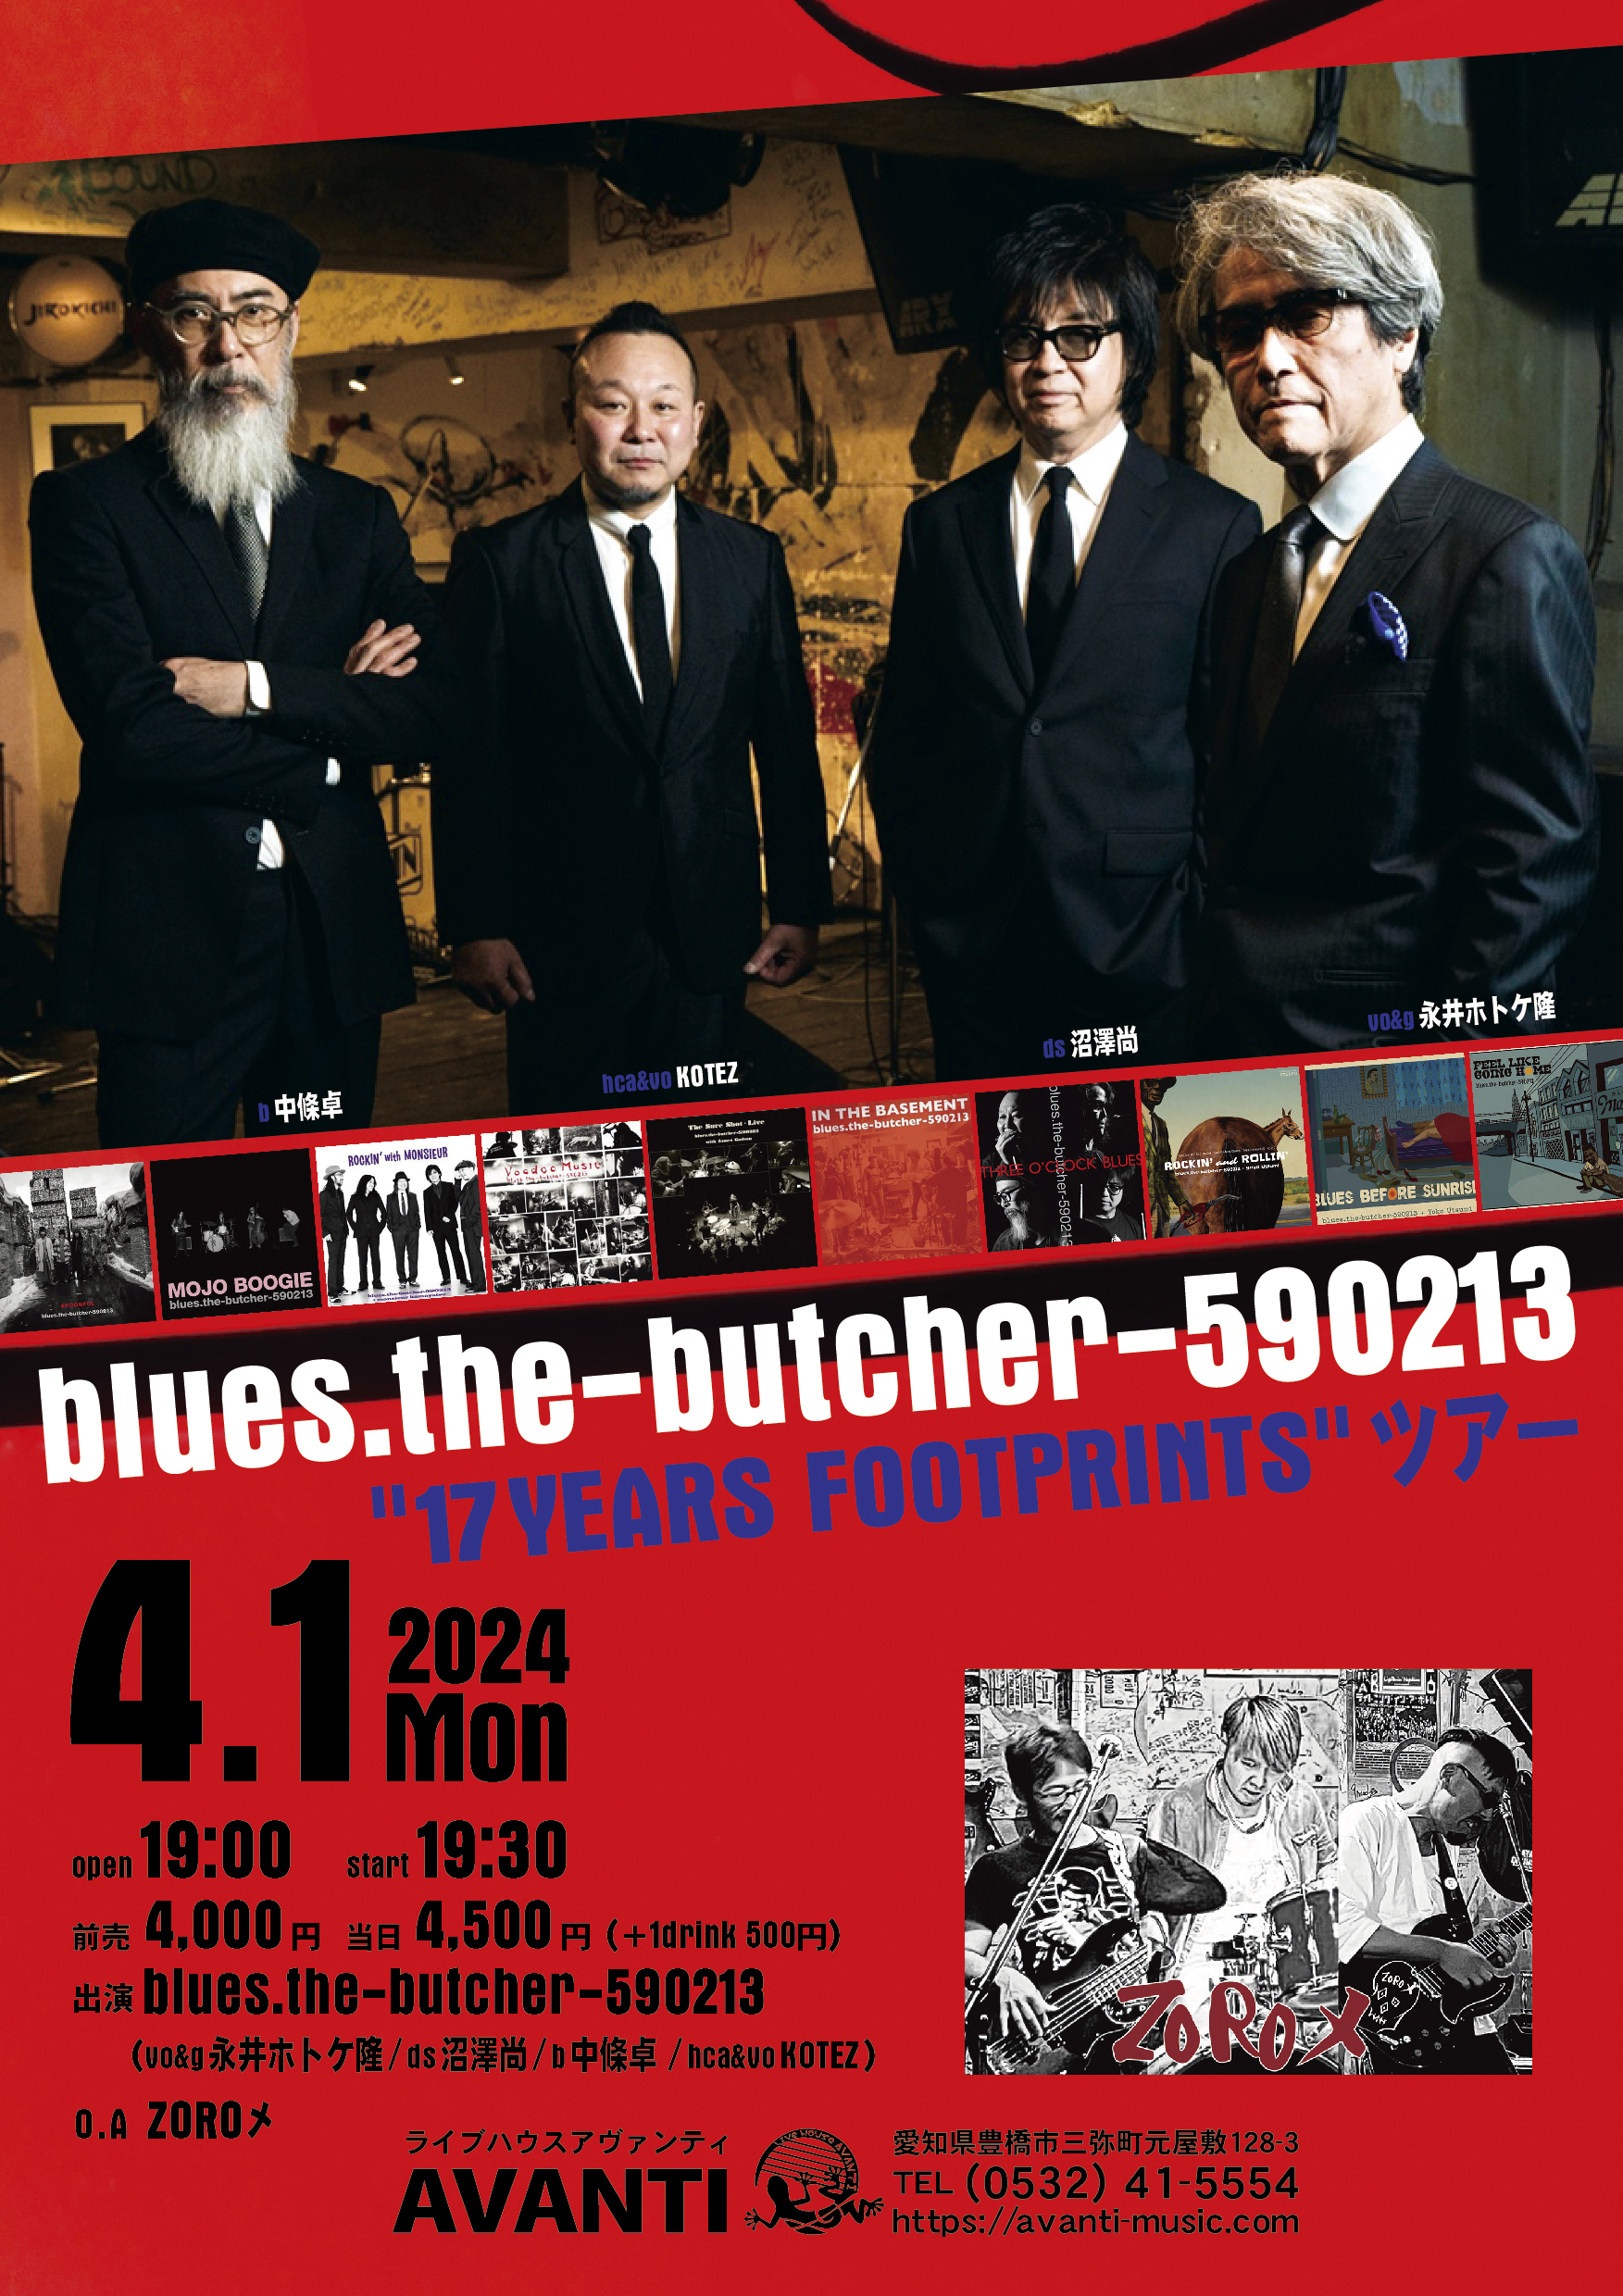 blues.the-butcher-590213 “17YEARS FOOTPRINTS” ツアー – ライブ